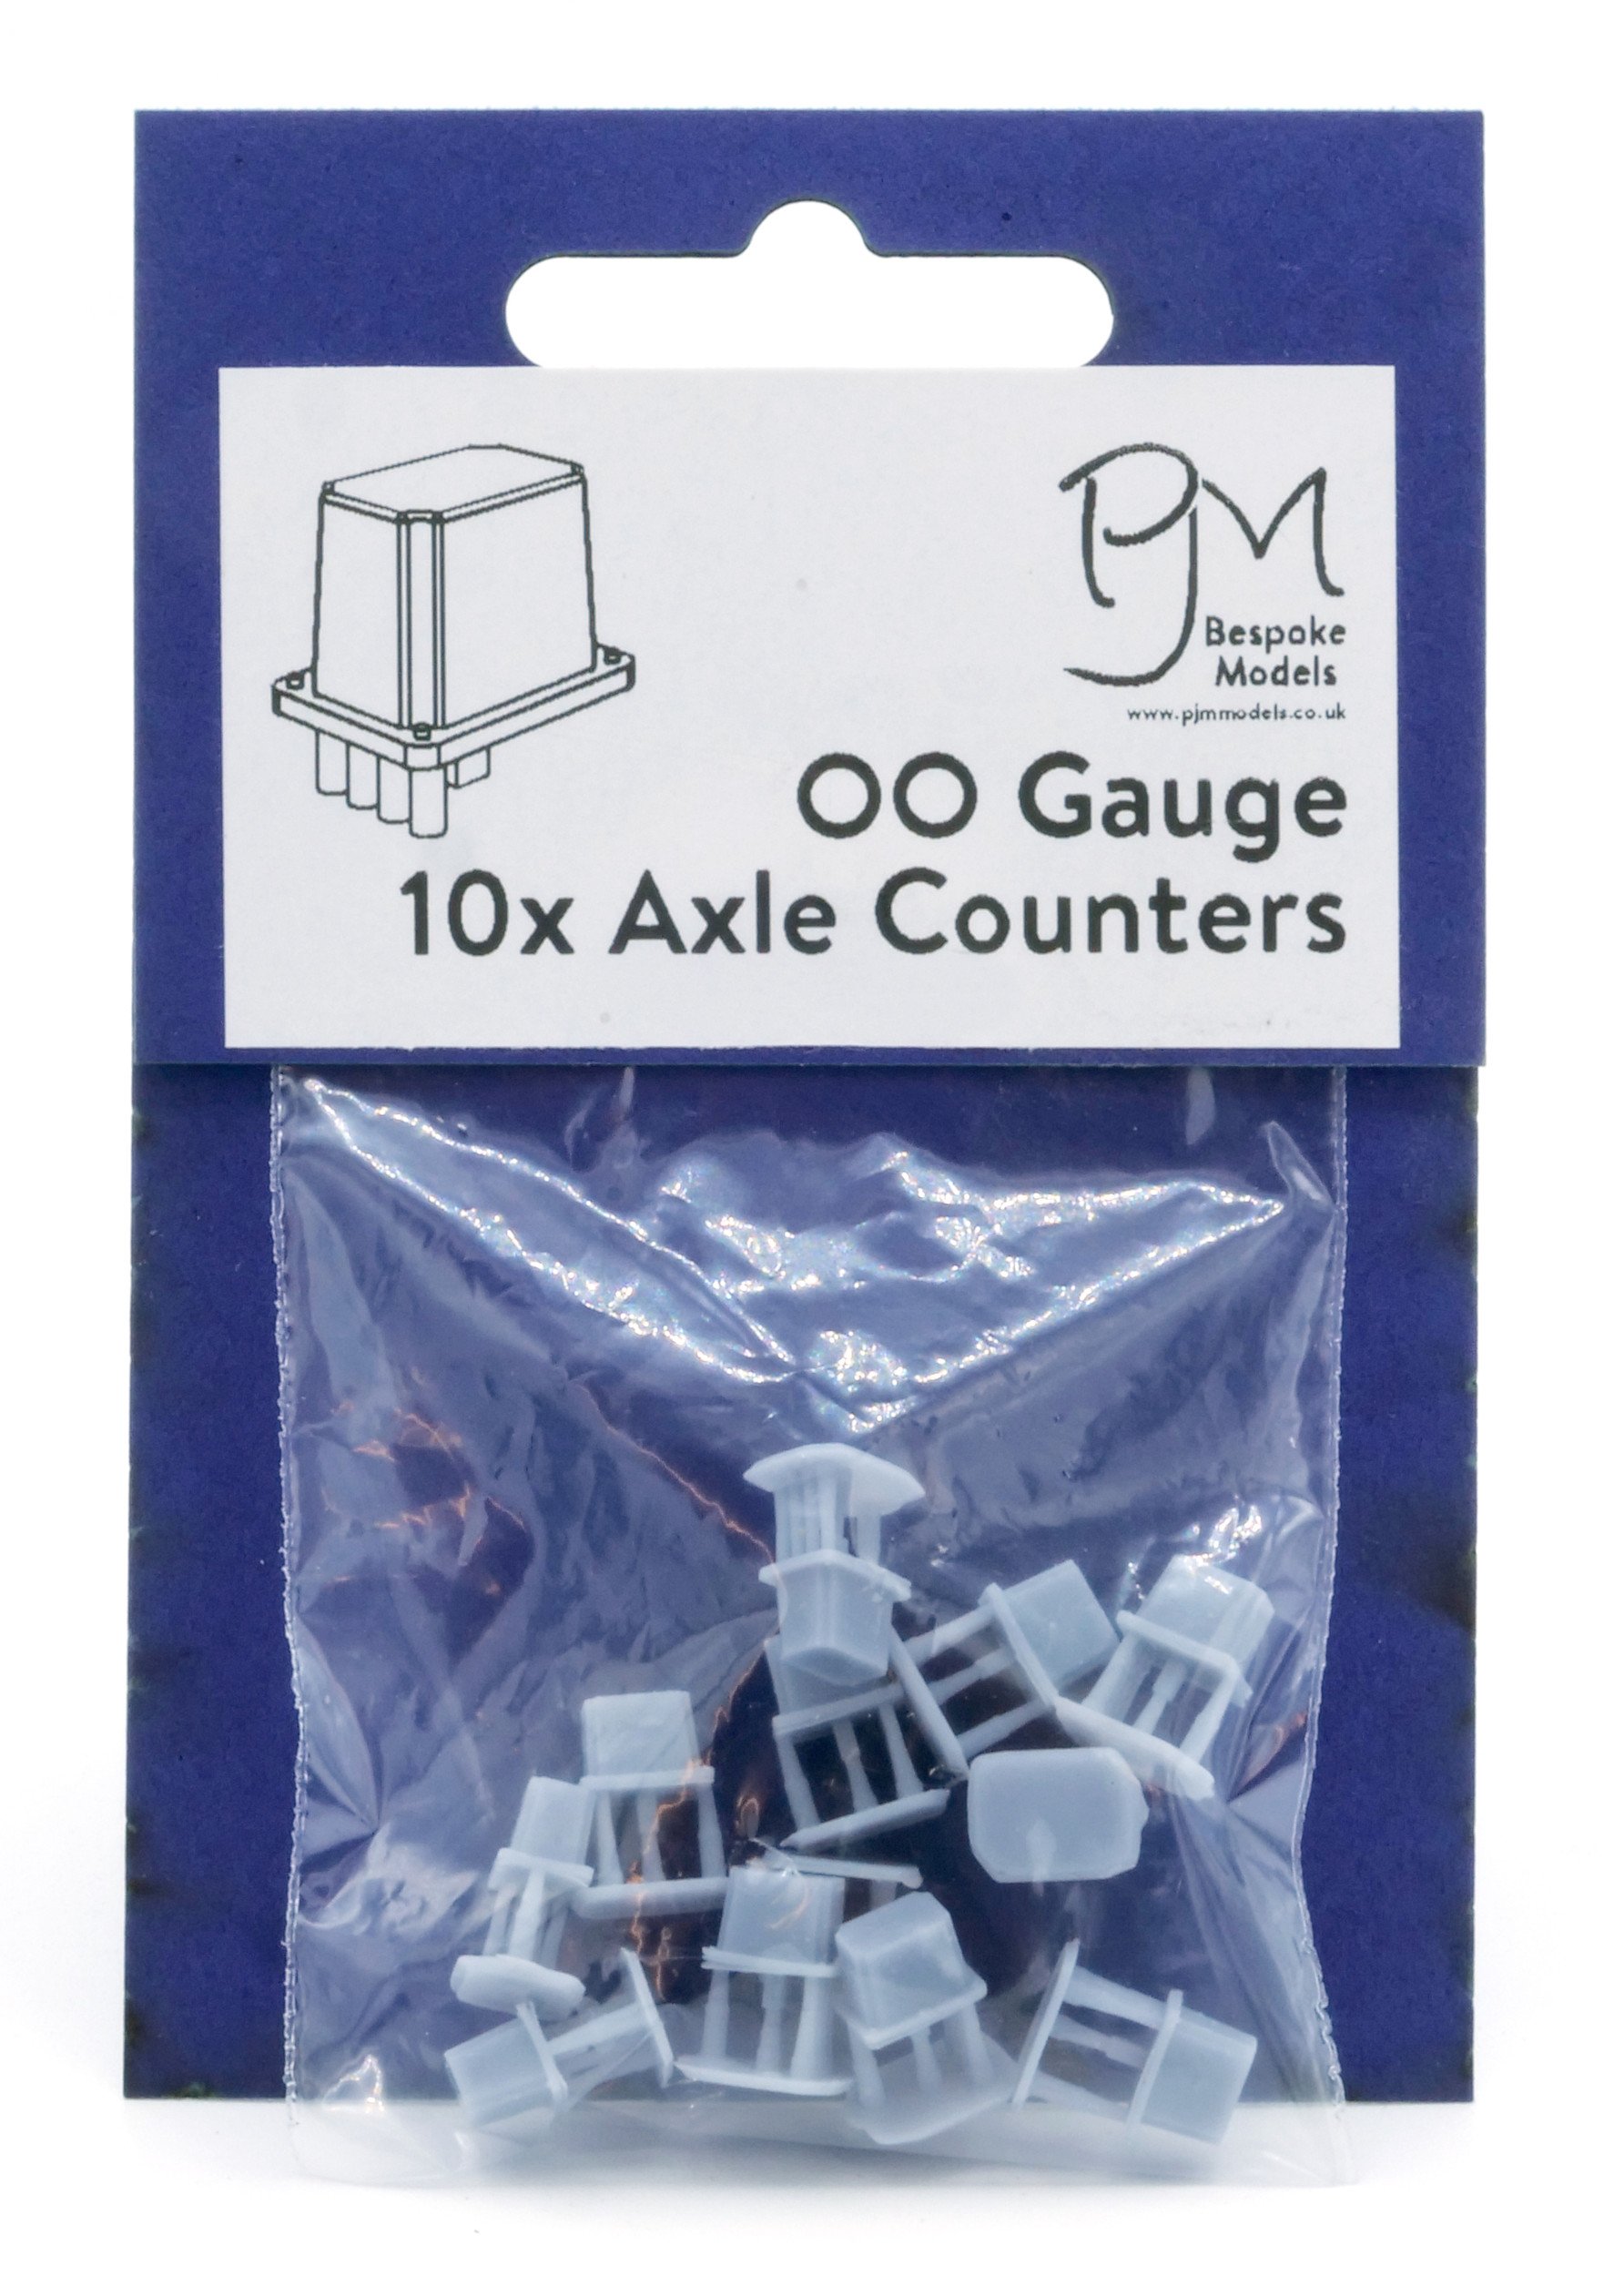 PJM Models latest release are 3D printed axle counters for 'OO' gauge.